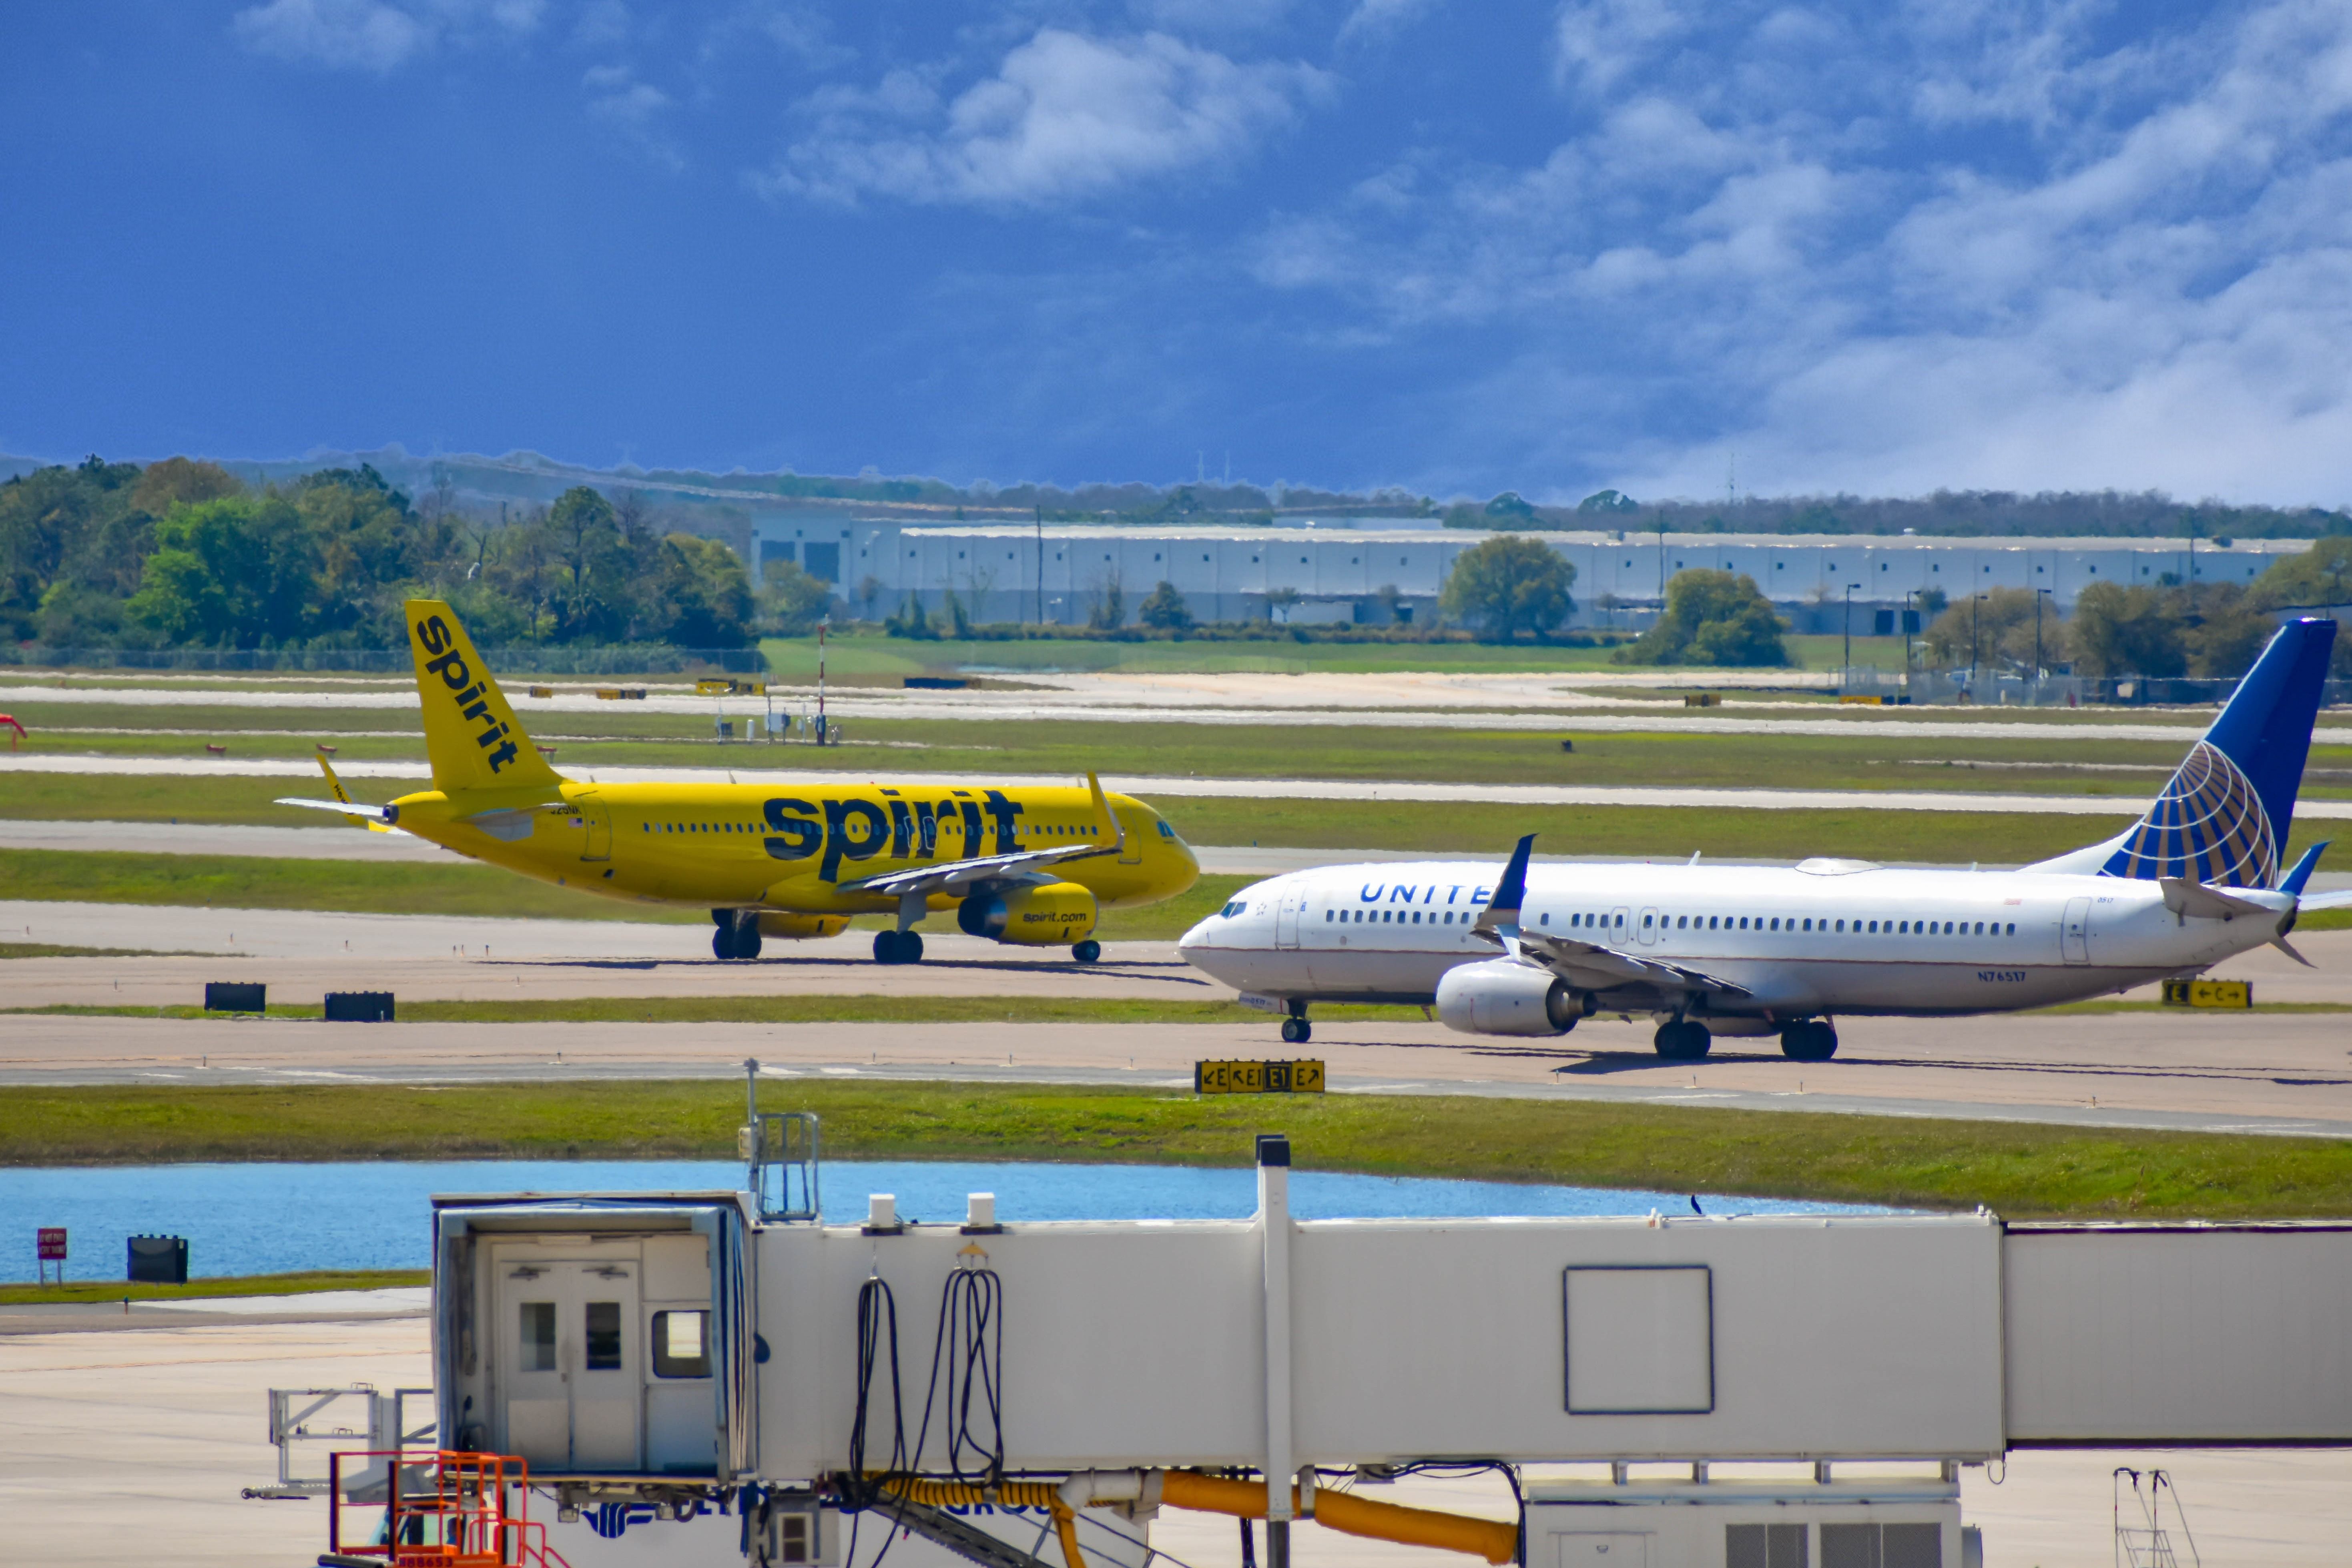 Spirit Airlines and United Airlines aircraft on runway preparing for departure from the Orlando International Airport.